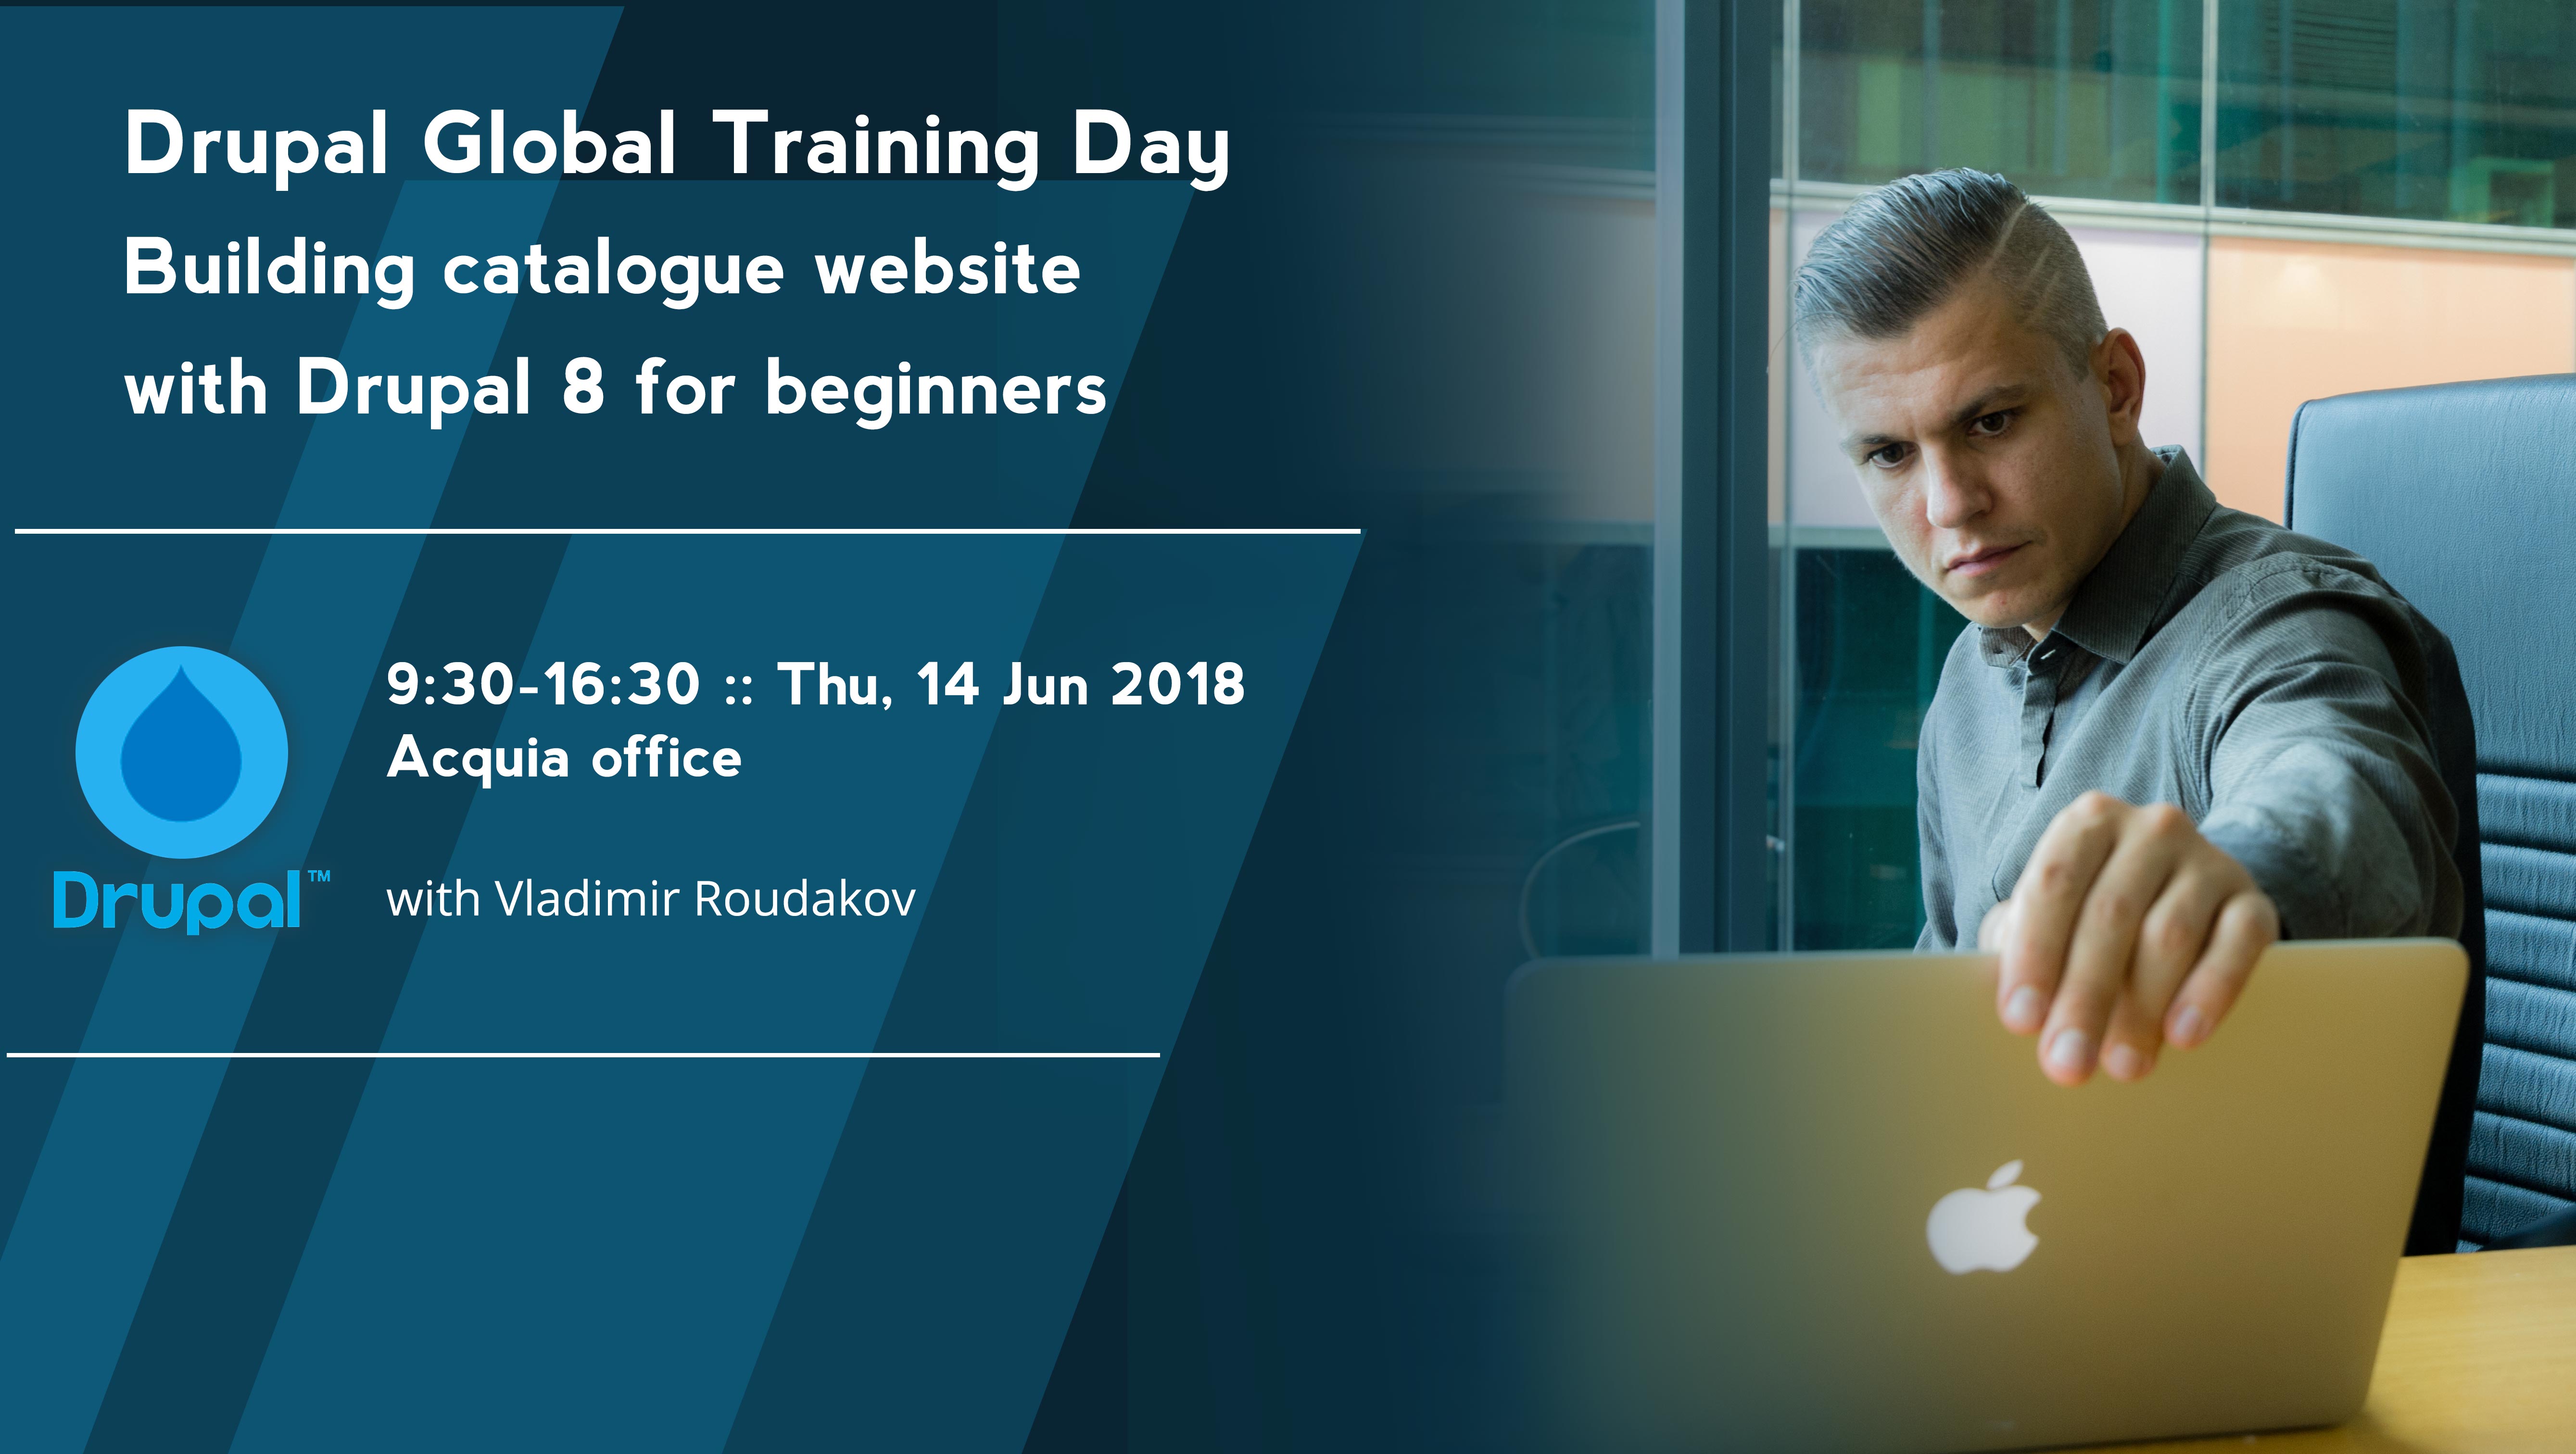 Drupal 8 training for beginners as a part of Drupal Global Training Day.